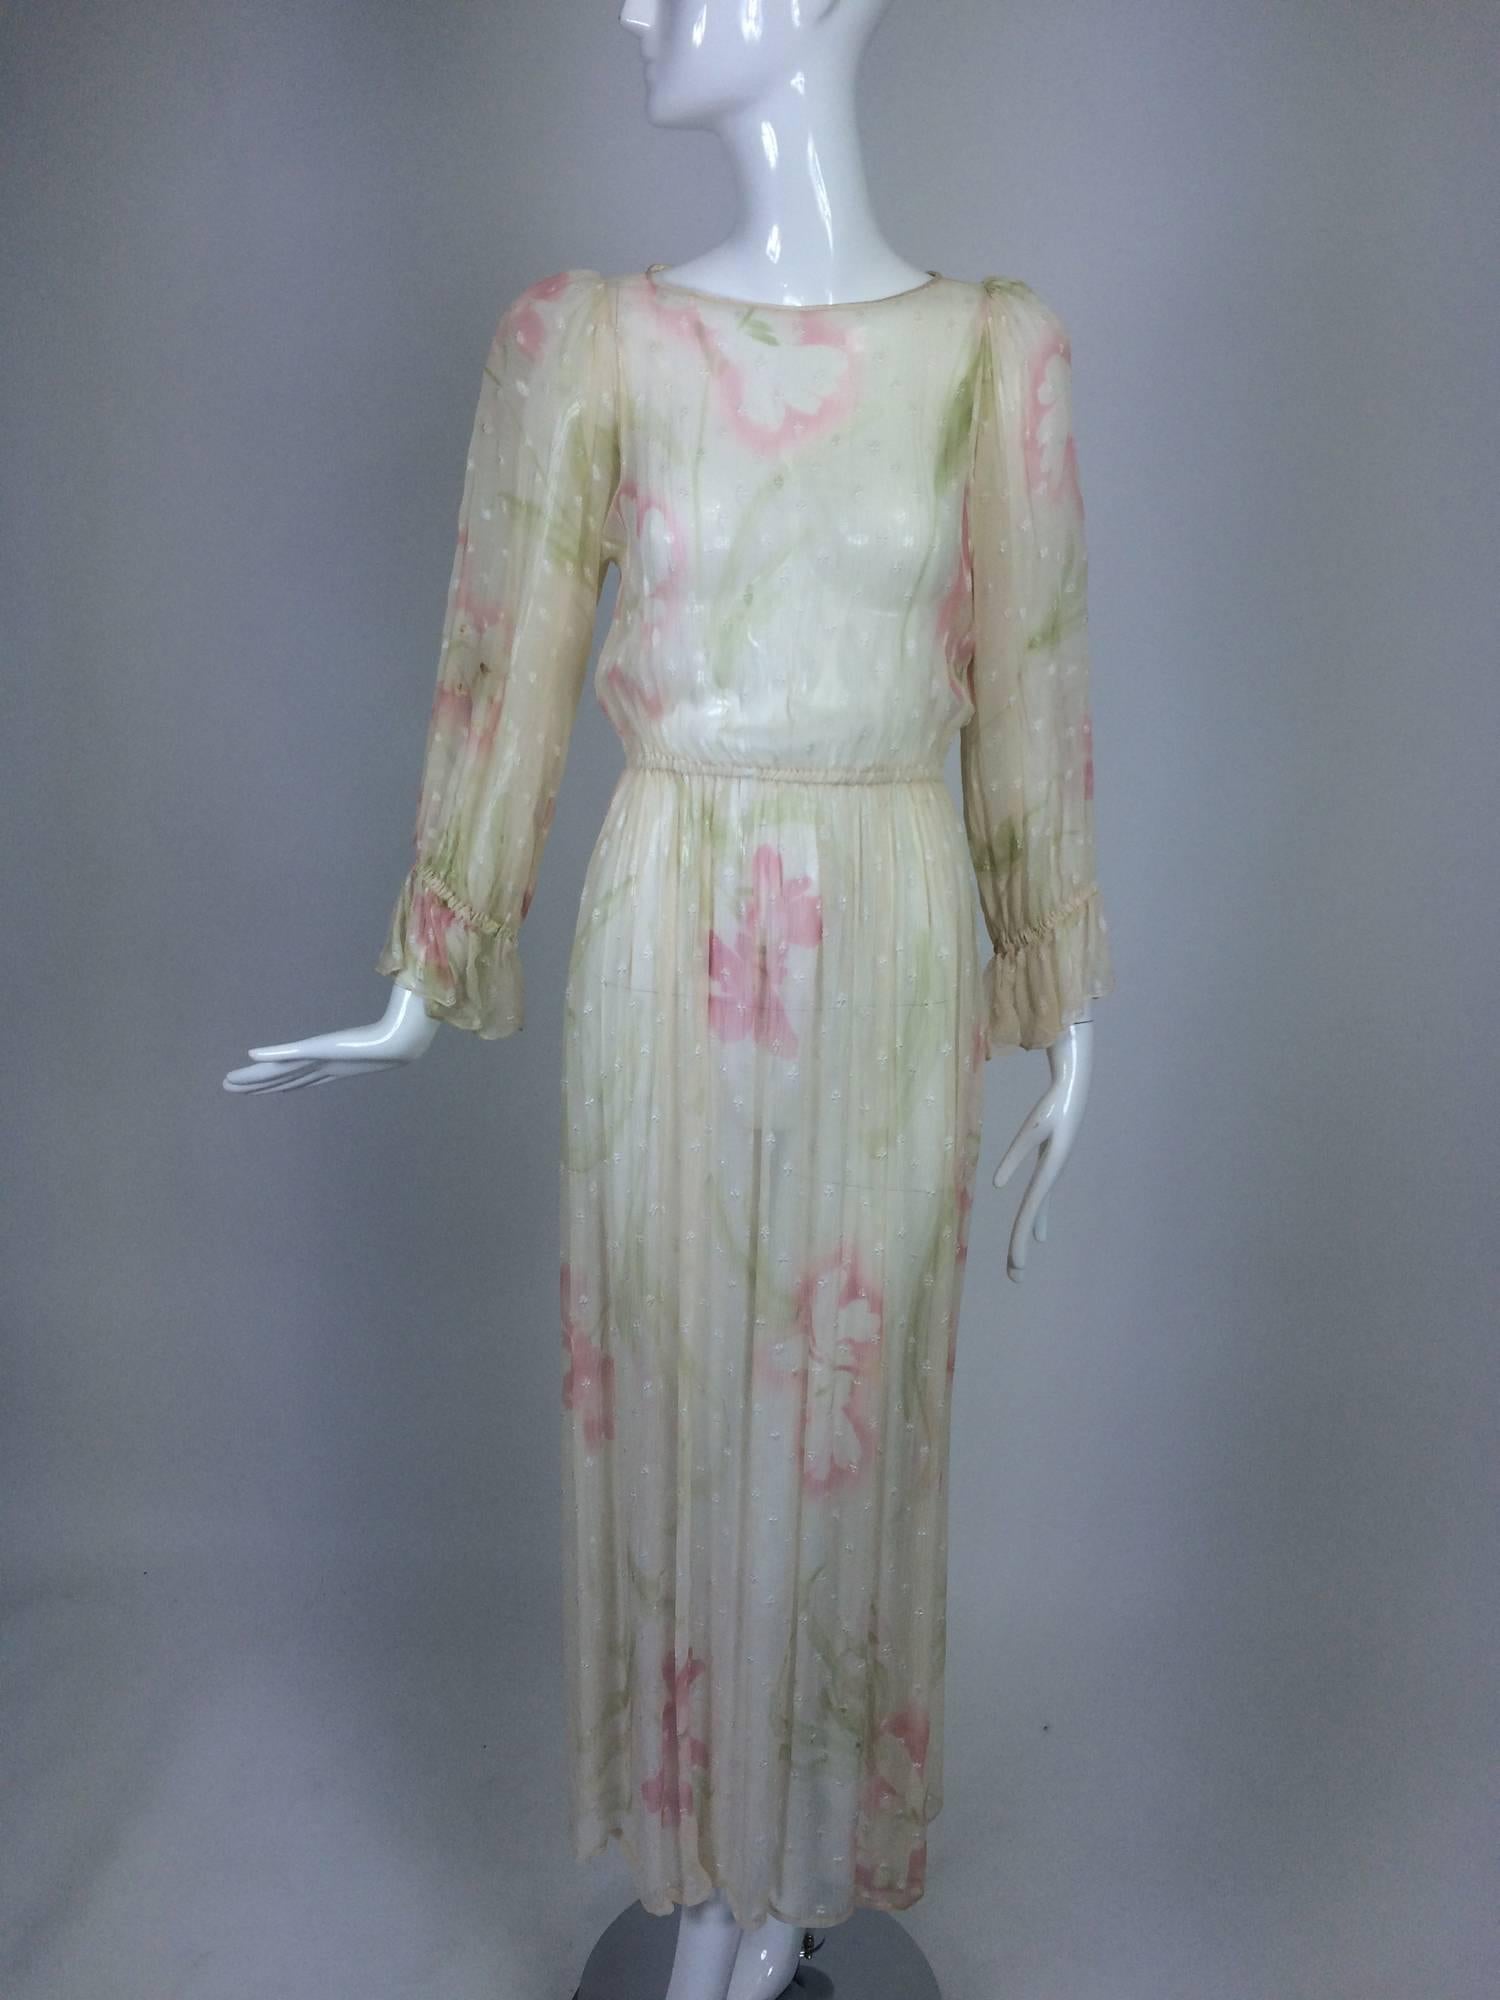 Hollys Harp off white sheer floral silk chiffon dress, with small white embroidered flowers scattered throughout, from the 1960s...Pull on dress has narrow ivory satin trim at the neck, the dress pulls on and has a key hole opening a the neck back